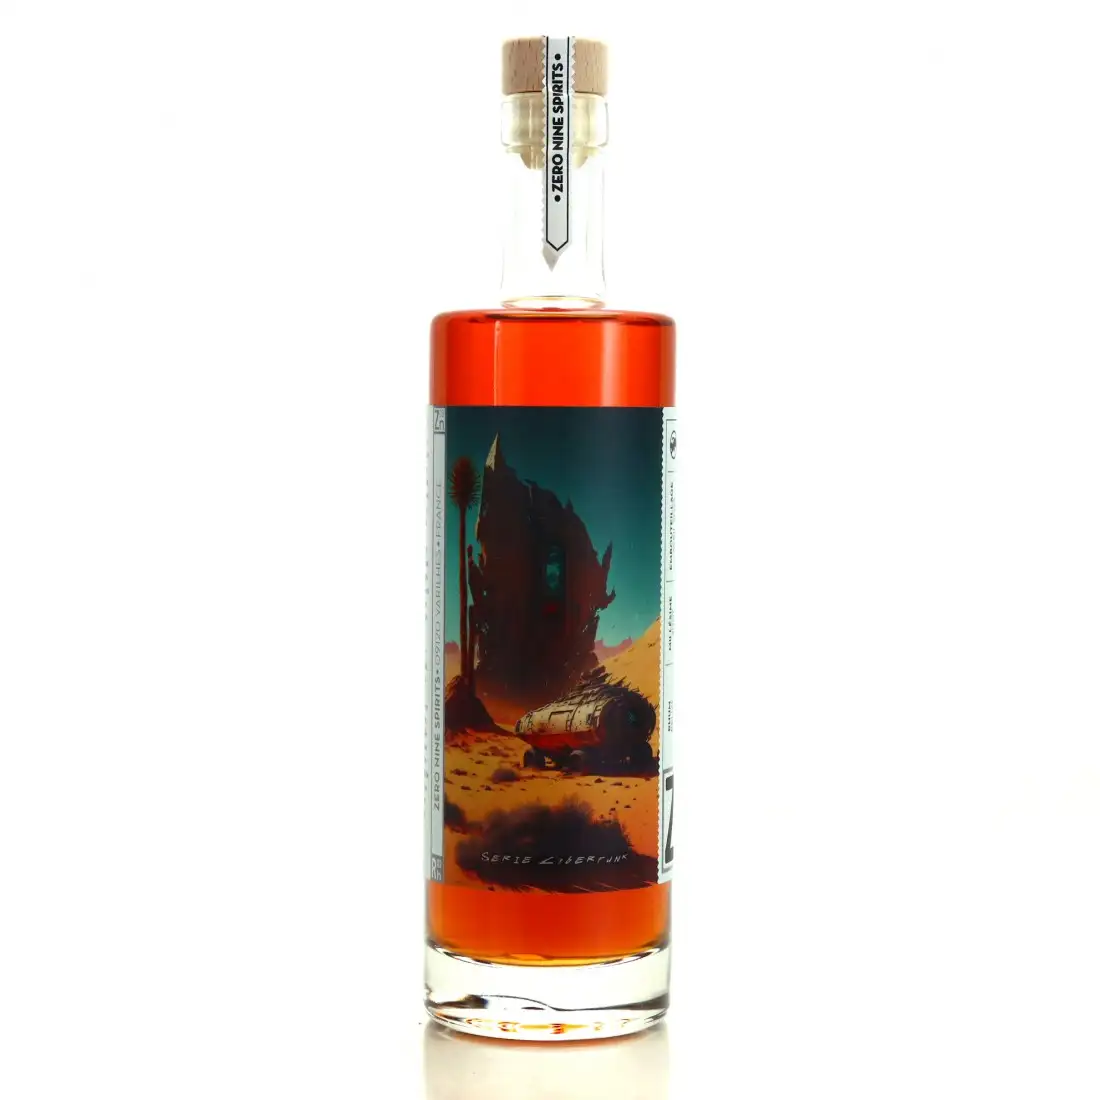 Image of the front of the bottle of the rum Série Cyberpunk